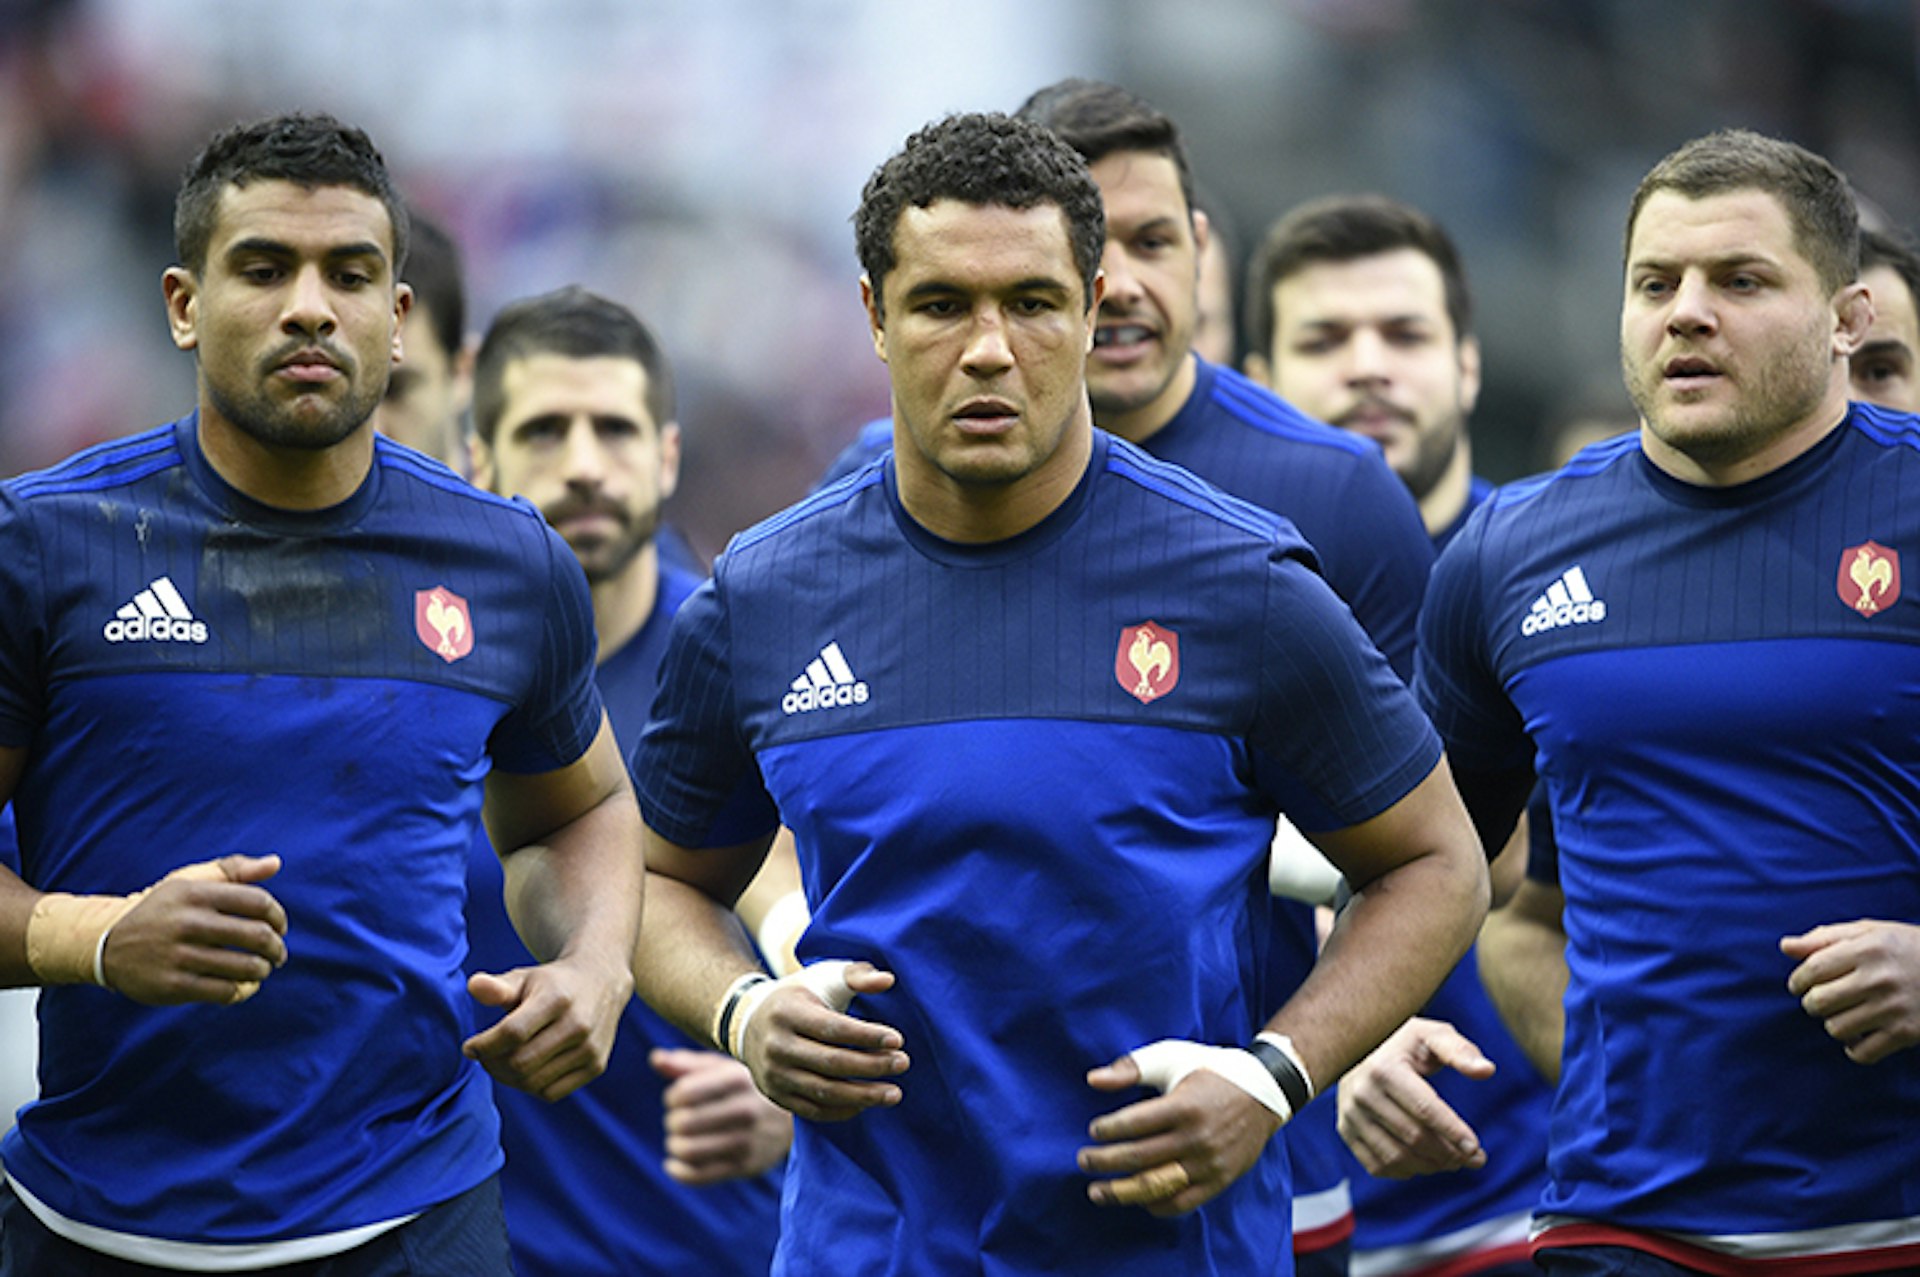 Members of the French rugby squad warming up before a match at the Stade de France, Paris. 